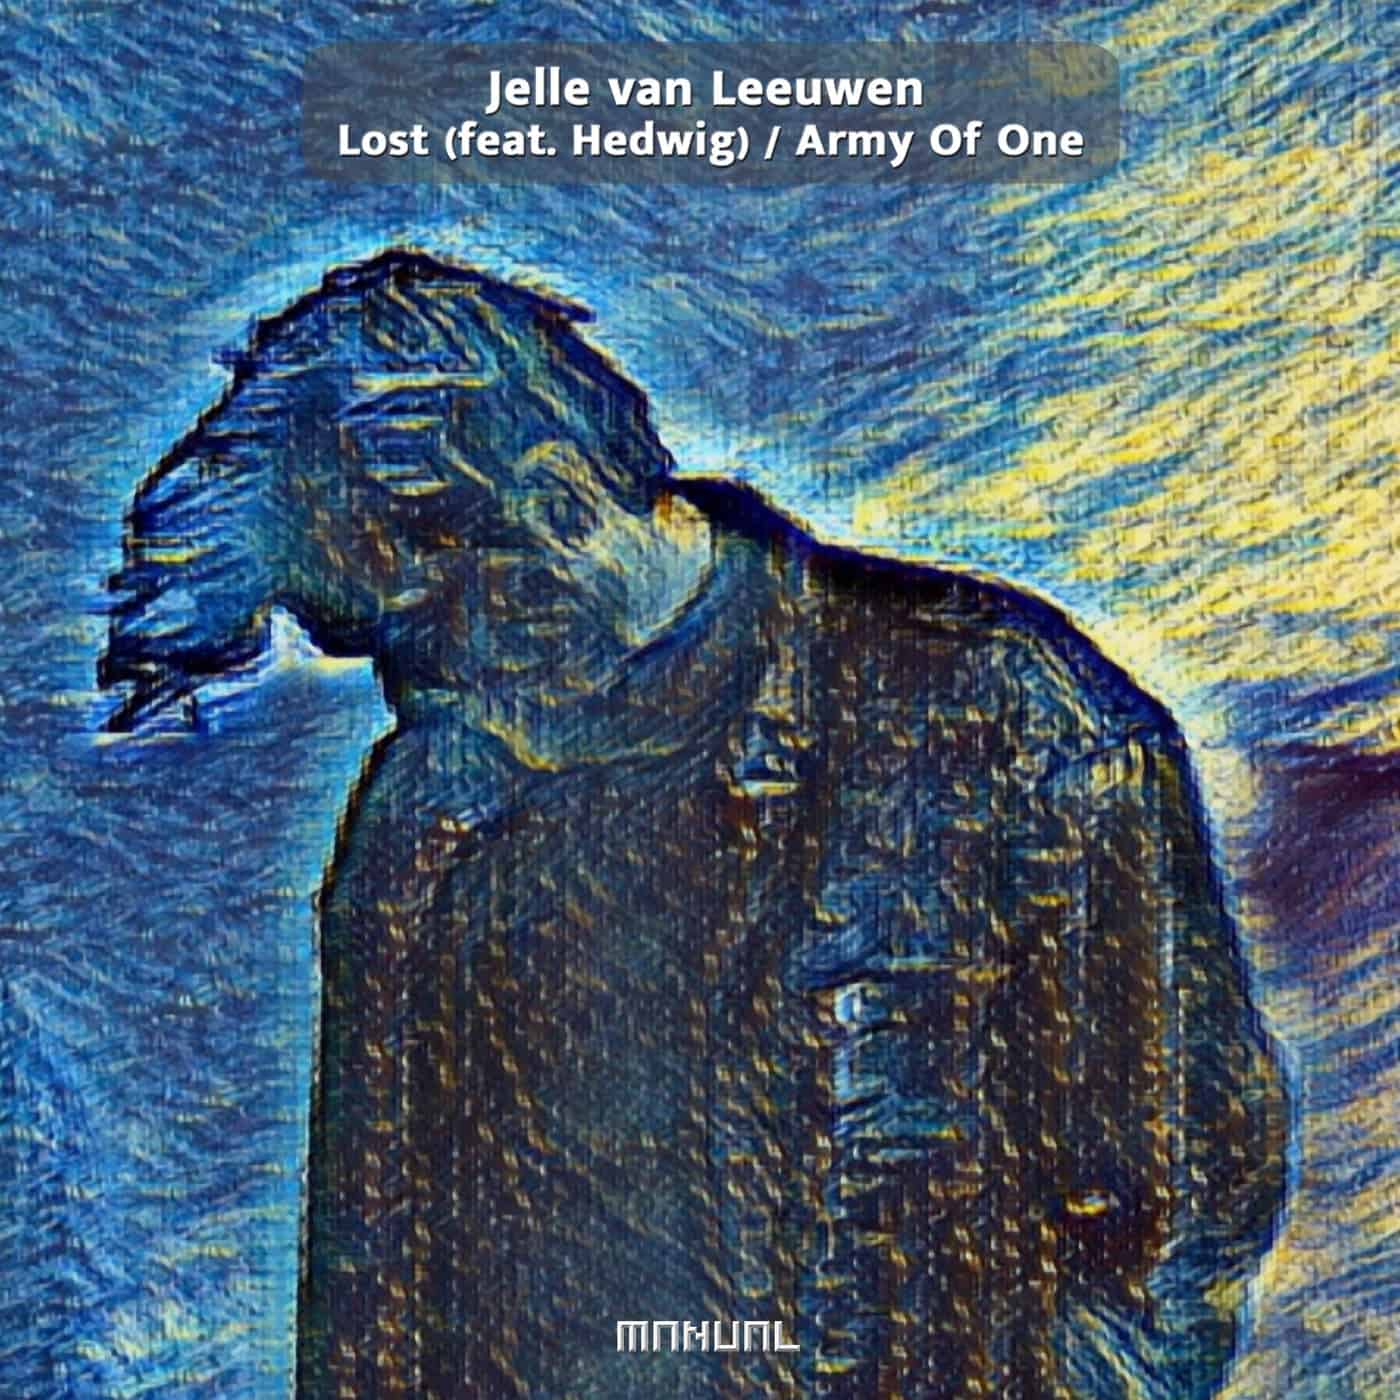 Download Hedwig, Jelle van Leeuwen - Lost / Army Of One on Electrobuzz